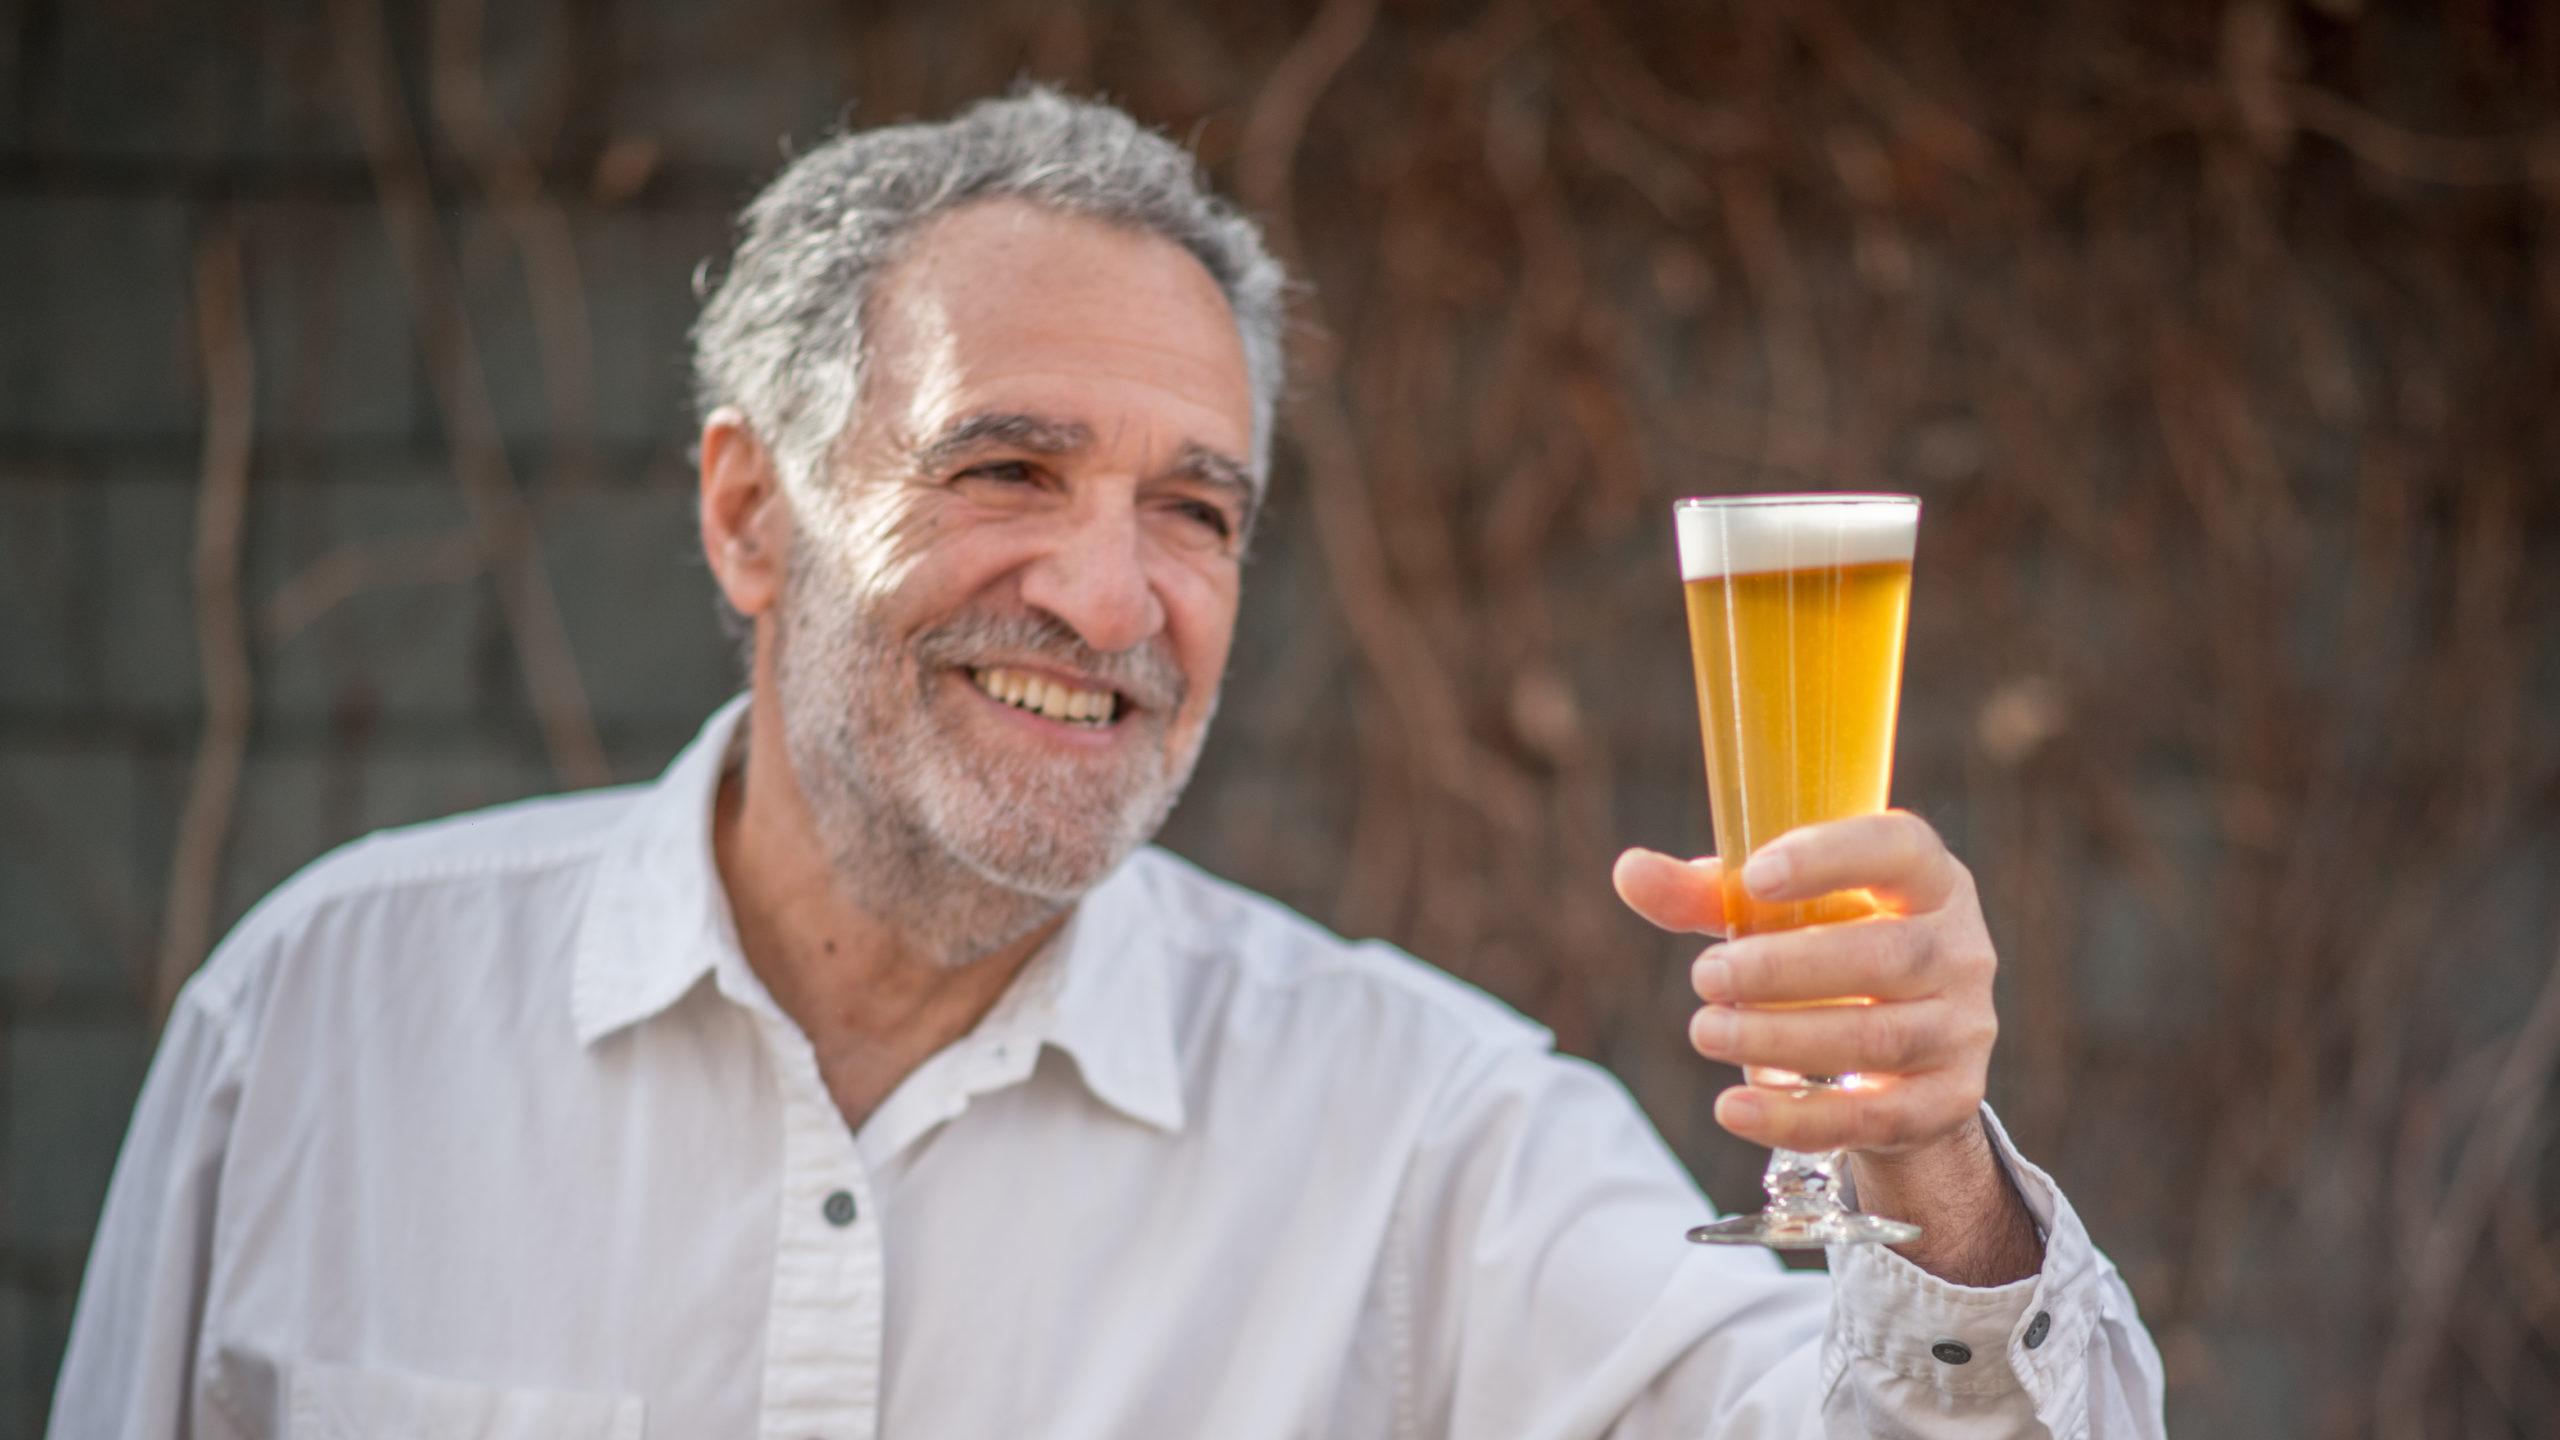 Charlie Papazian holding a beer glass